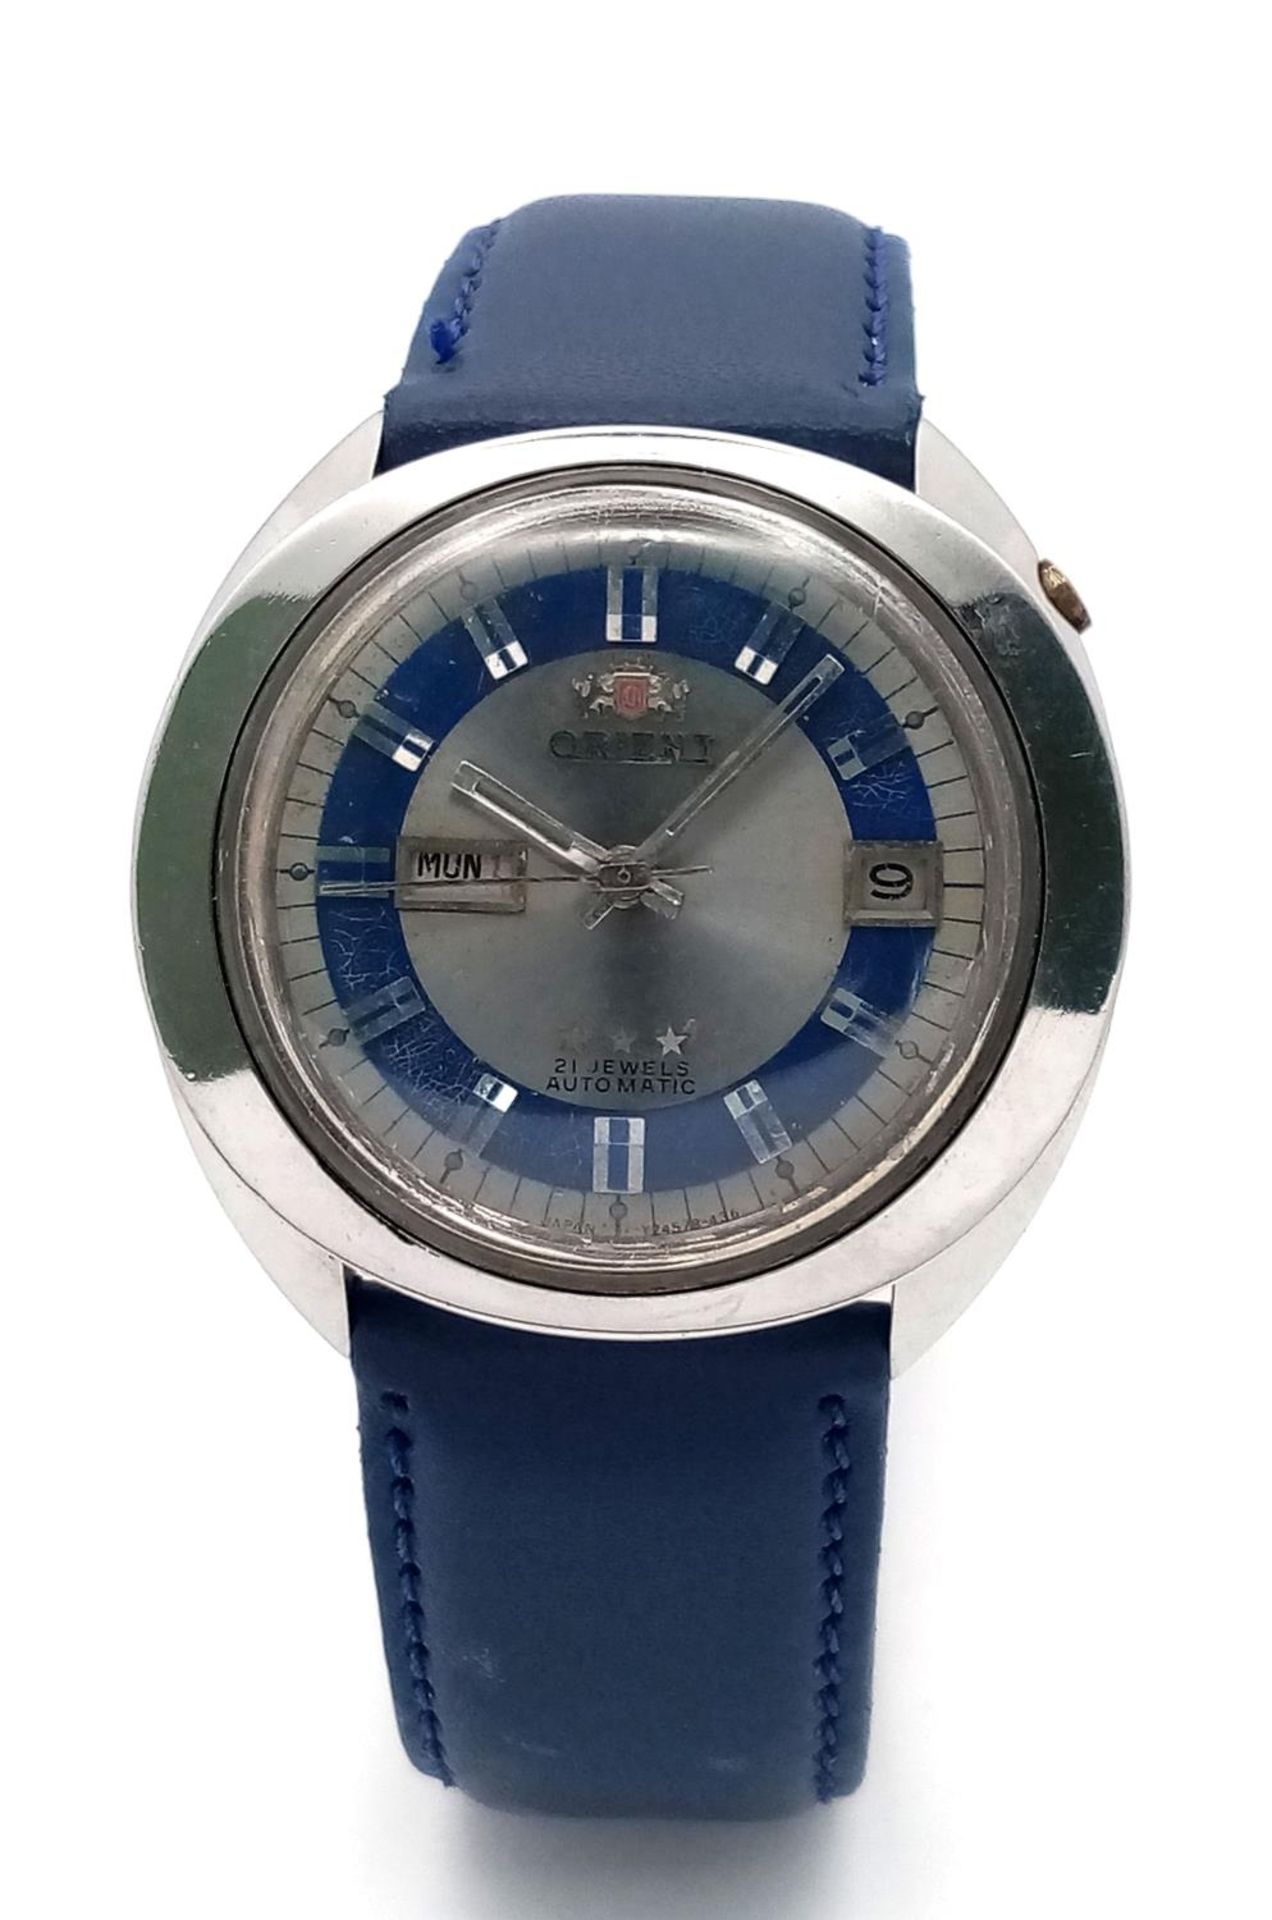 A Vintage Orient 21 Jewels Automatic Gents Watch. Blue leather strap. Stainless steel case - 40mm. - Image 2 of 6